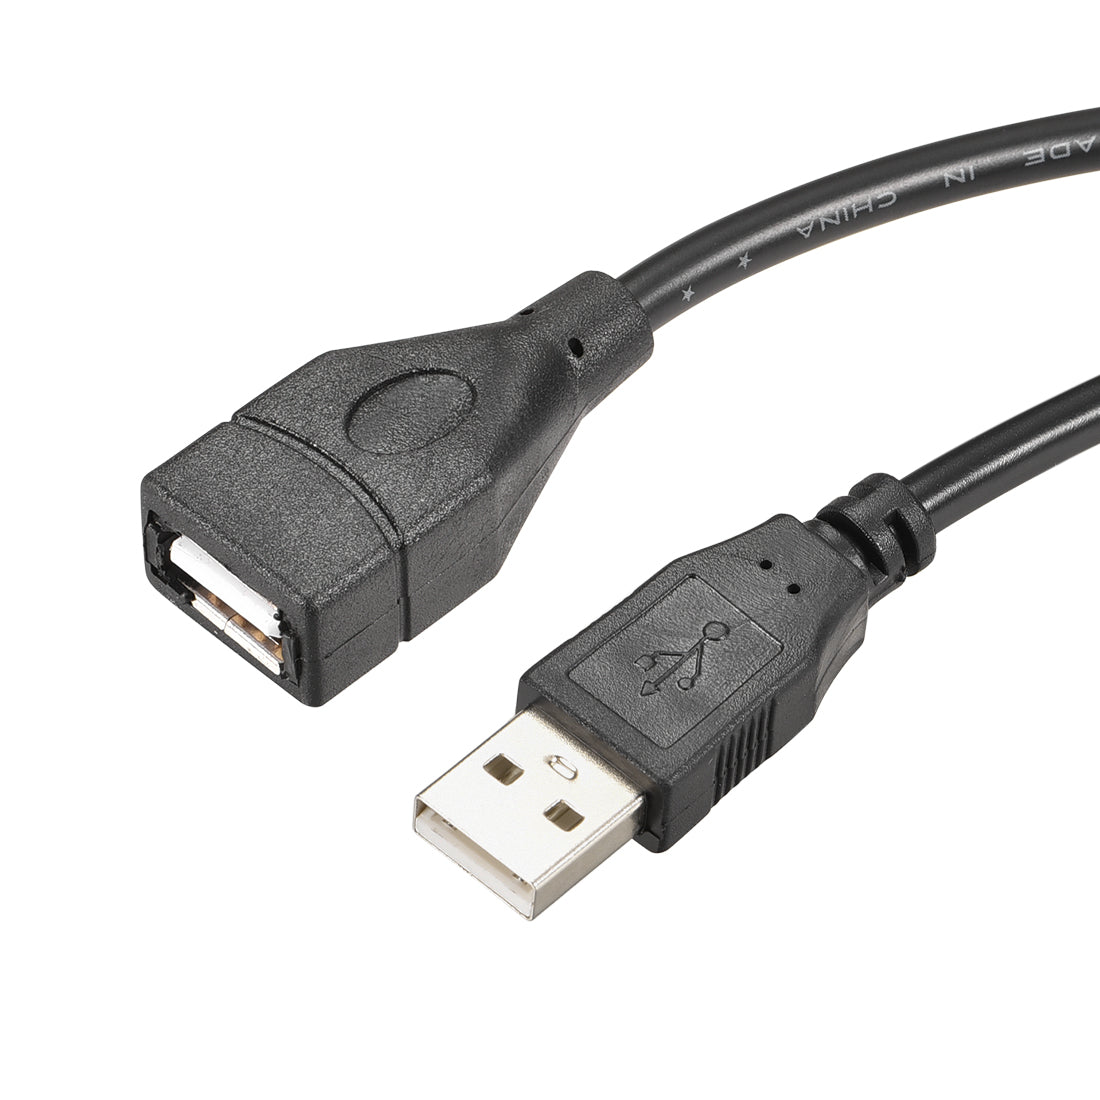 uxcell Uxcell USB Extension Cable,1.5m Type a Male to USB a Female USB Wire Black